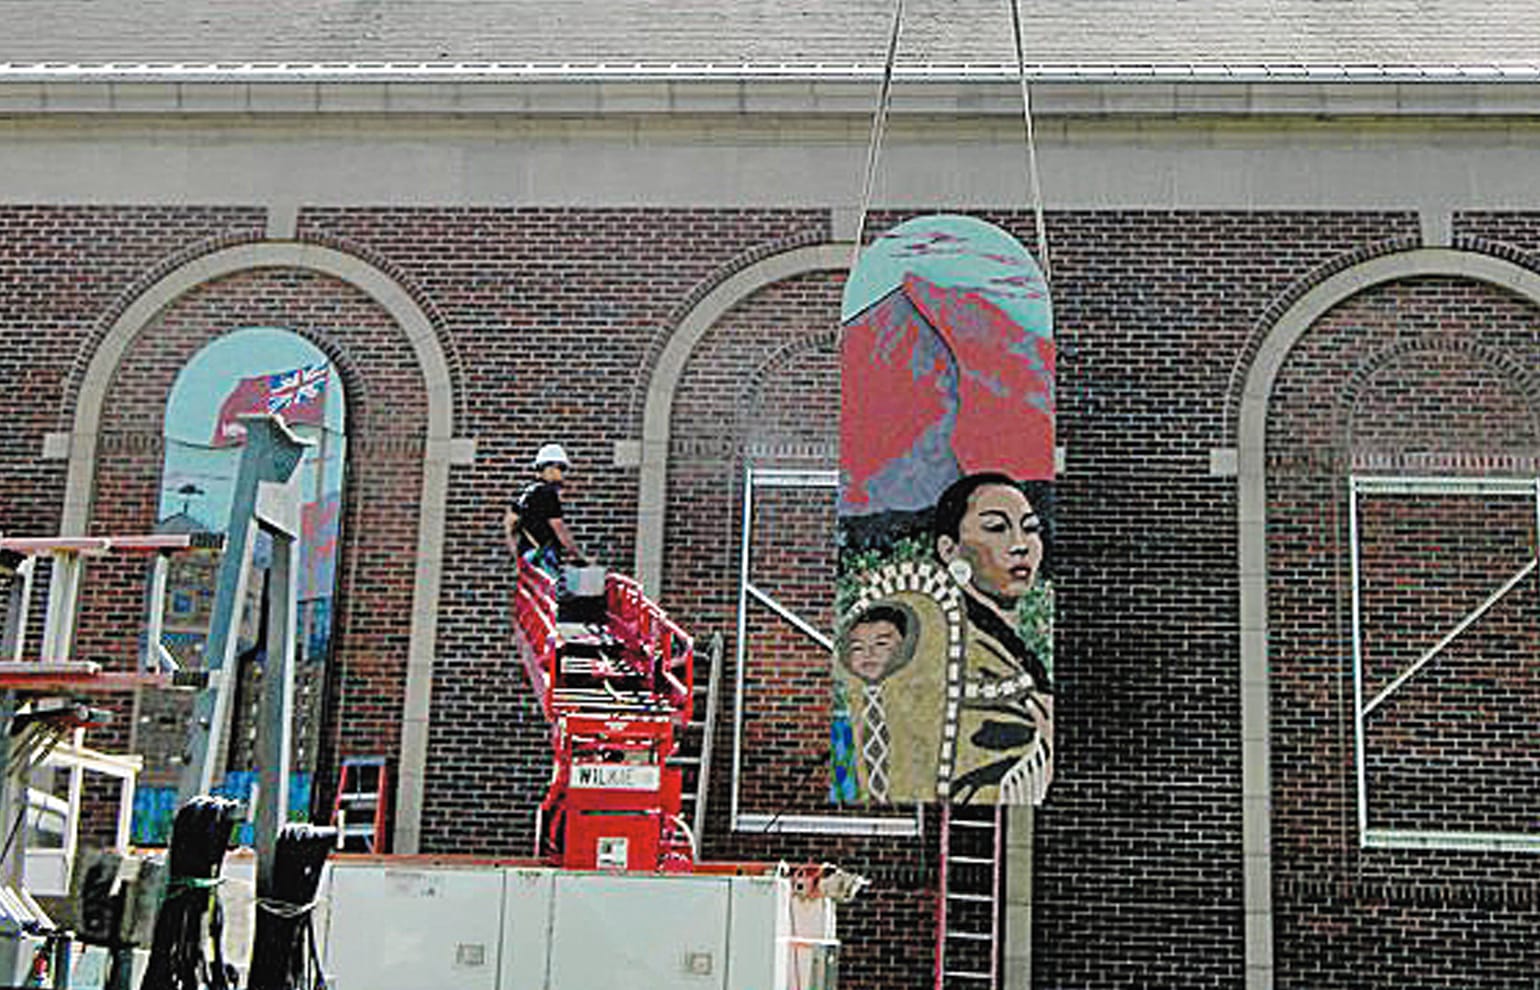 The final Vancouver School of Arts and Academics Confluence Project triptych of mosaic artwork was installed Tuesday morning on the exterior of the school.